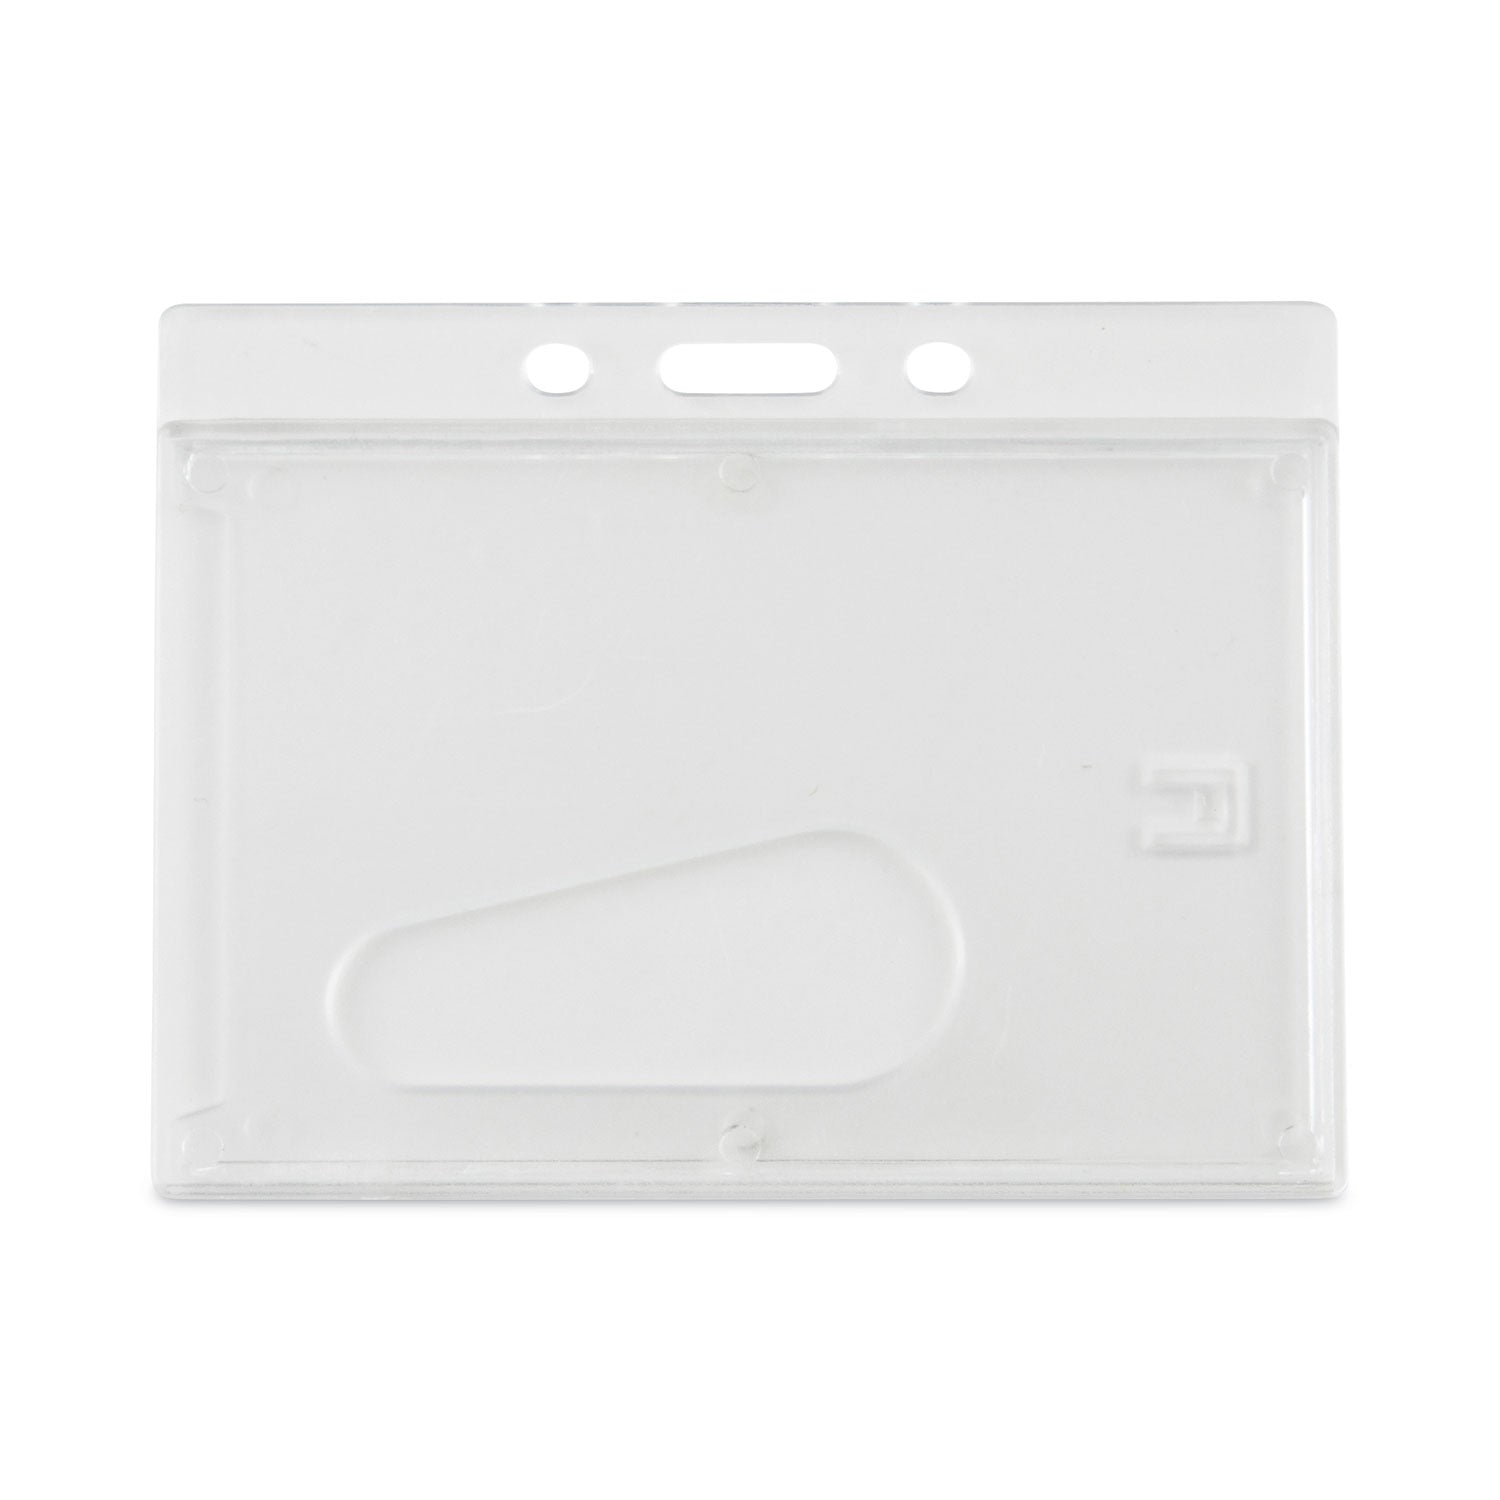 Frosted One-Card Rigid Badge Holders, Horizontal, Frosted 3.68" x 2.75" Holder, 3.38" x 2.13" Insert, 25/Box - 